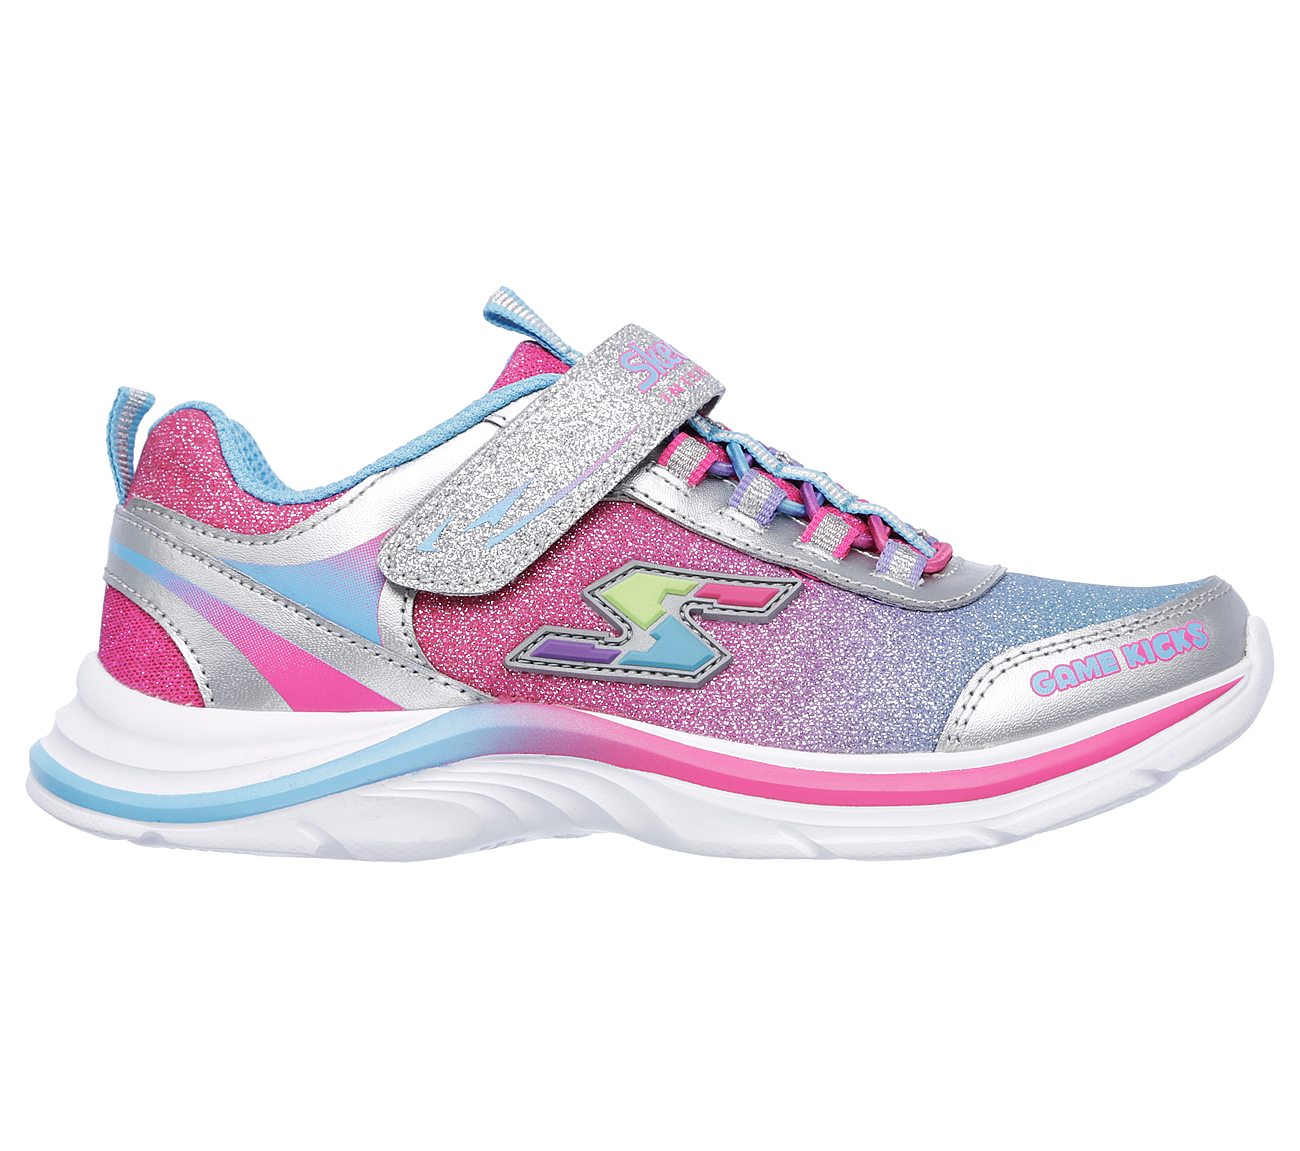 skechers interactive game shoes